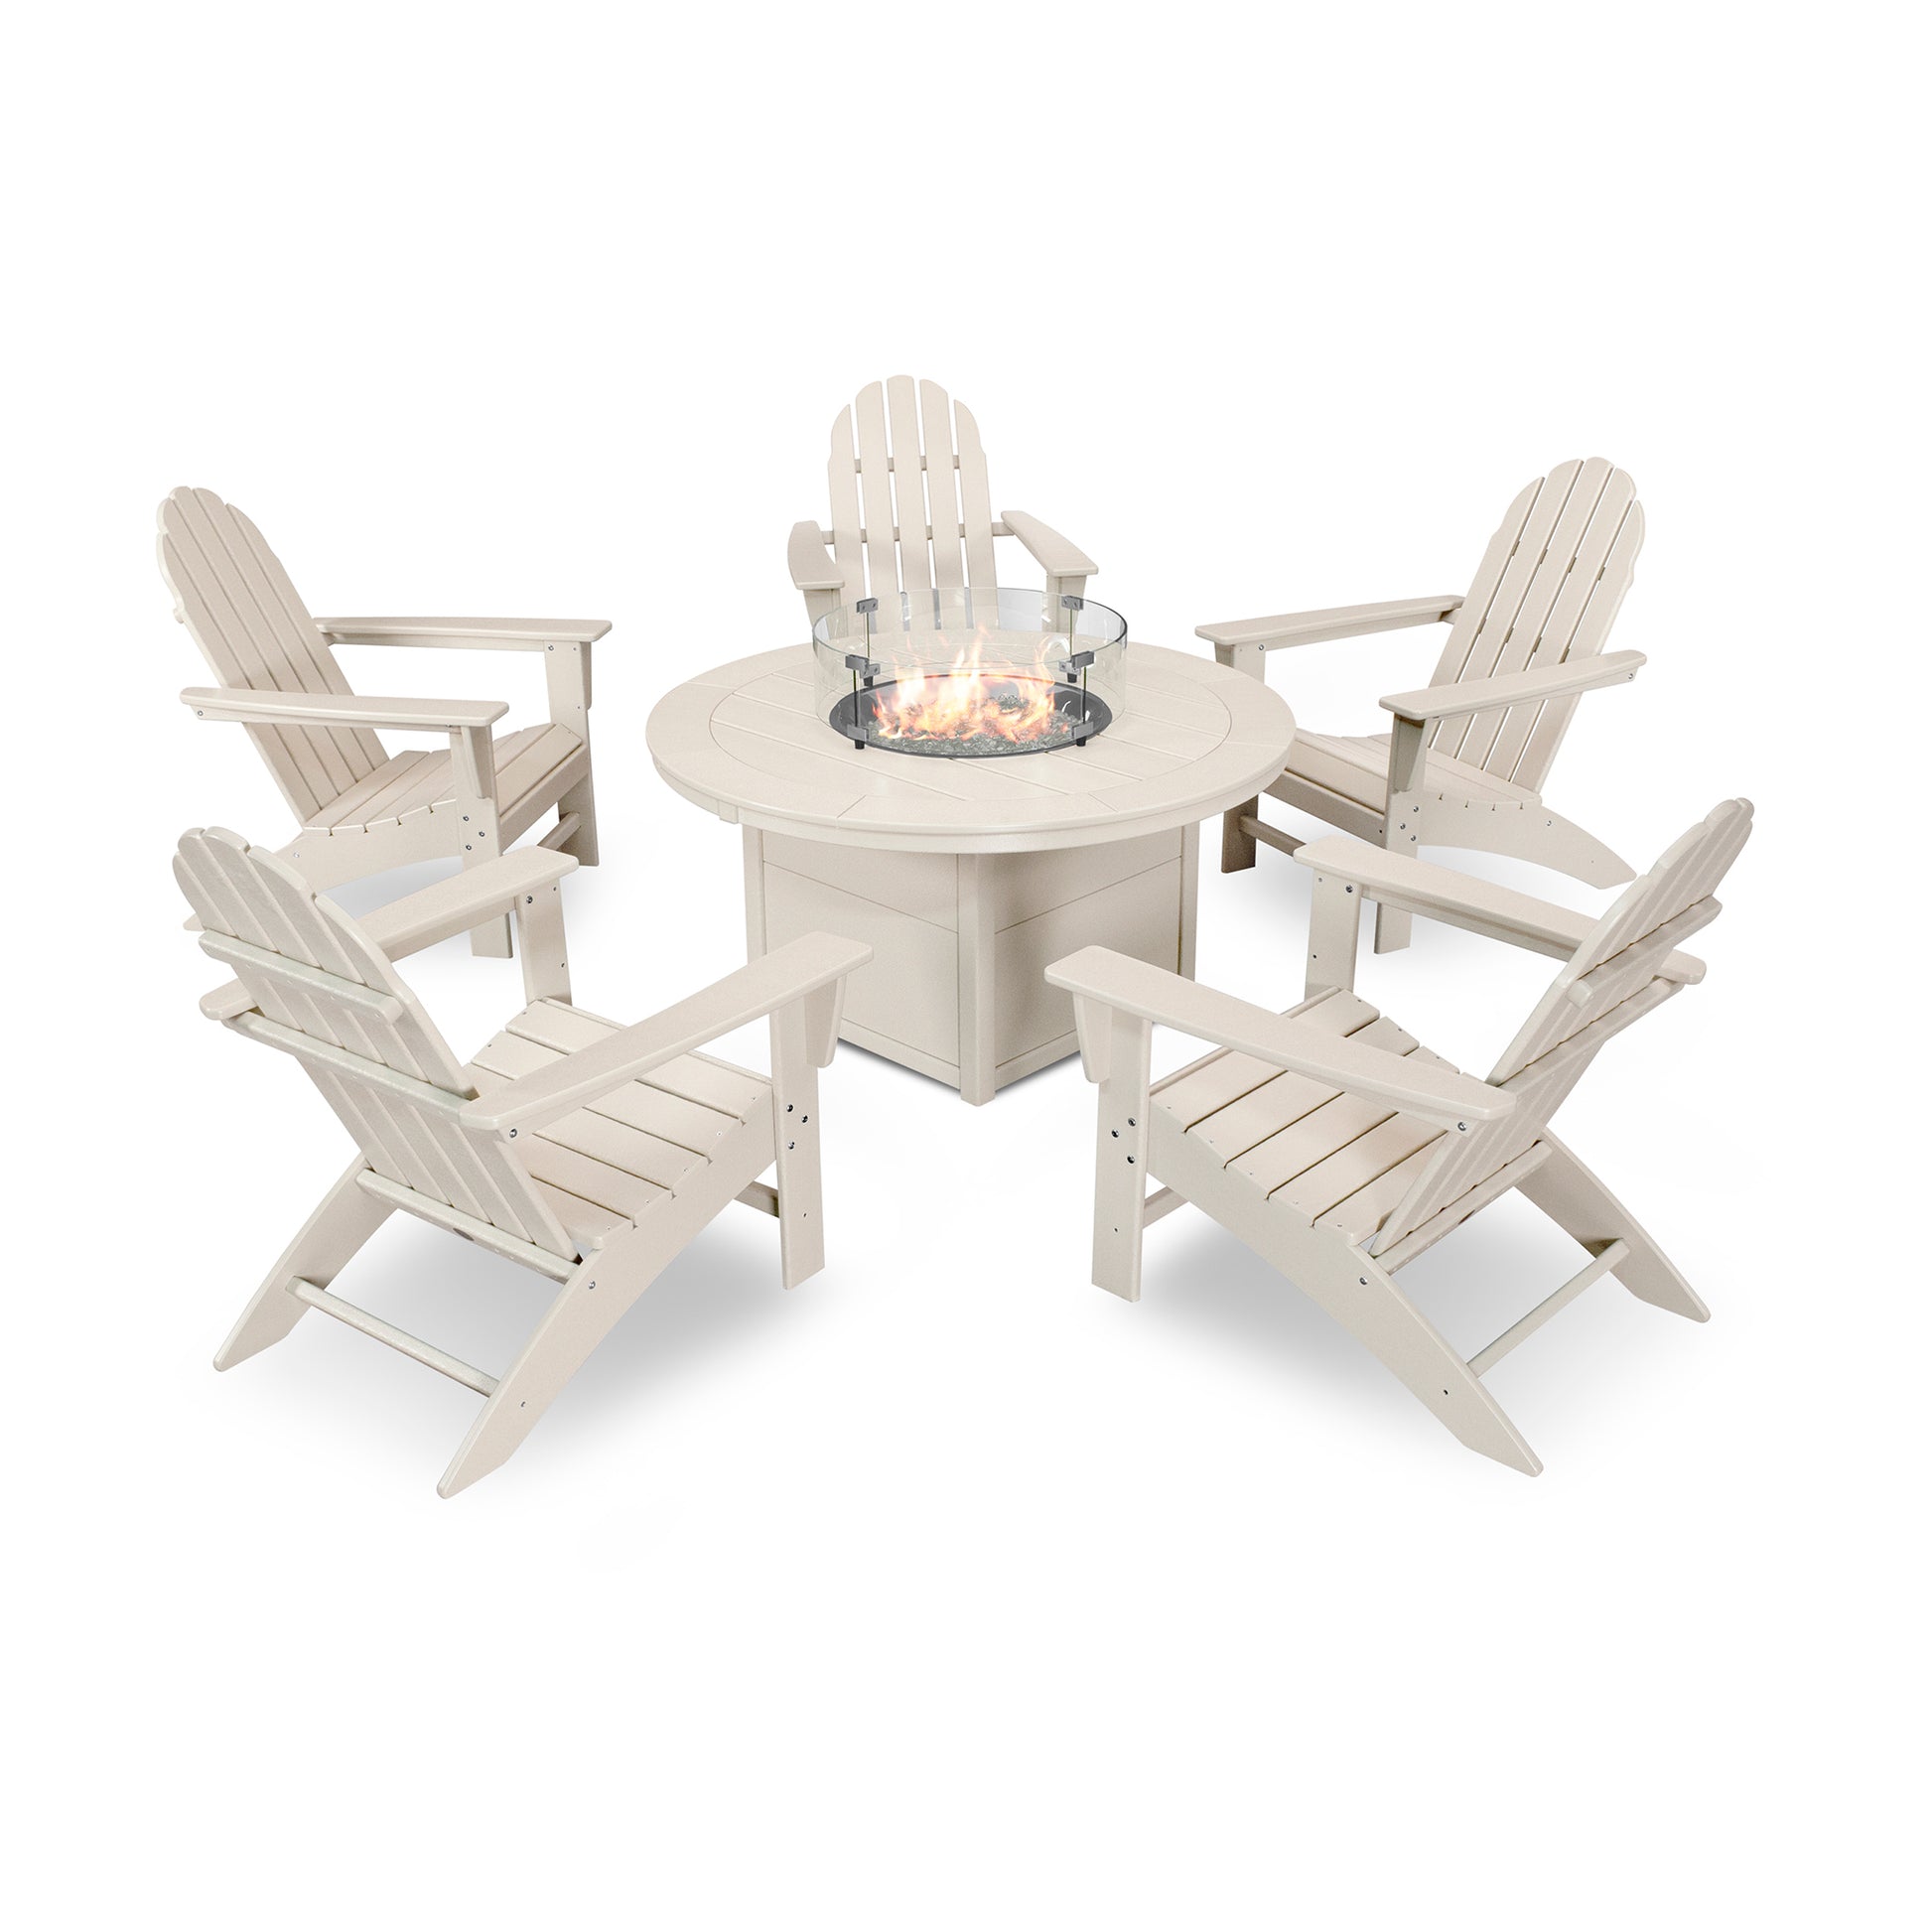 Four POLYWOOD Vineyard Adirondack 6-Piece Chat Sets with Fire Pit Table arranged around a round patio fire pit table, with a visible flame in the center, set against a plain white background.